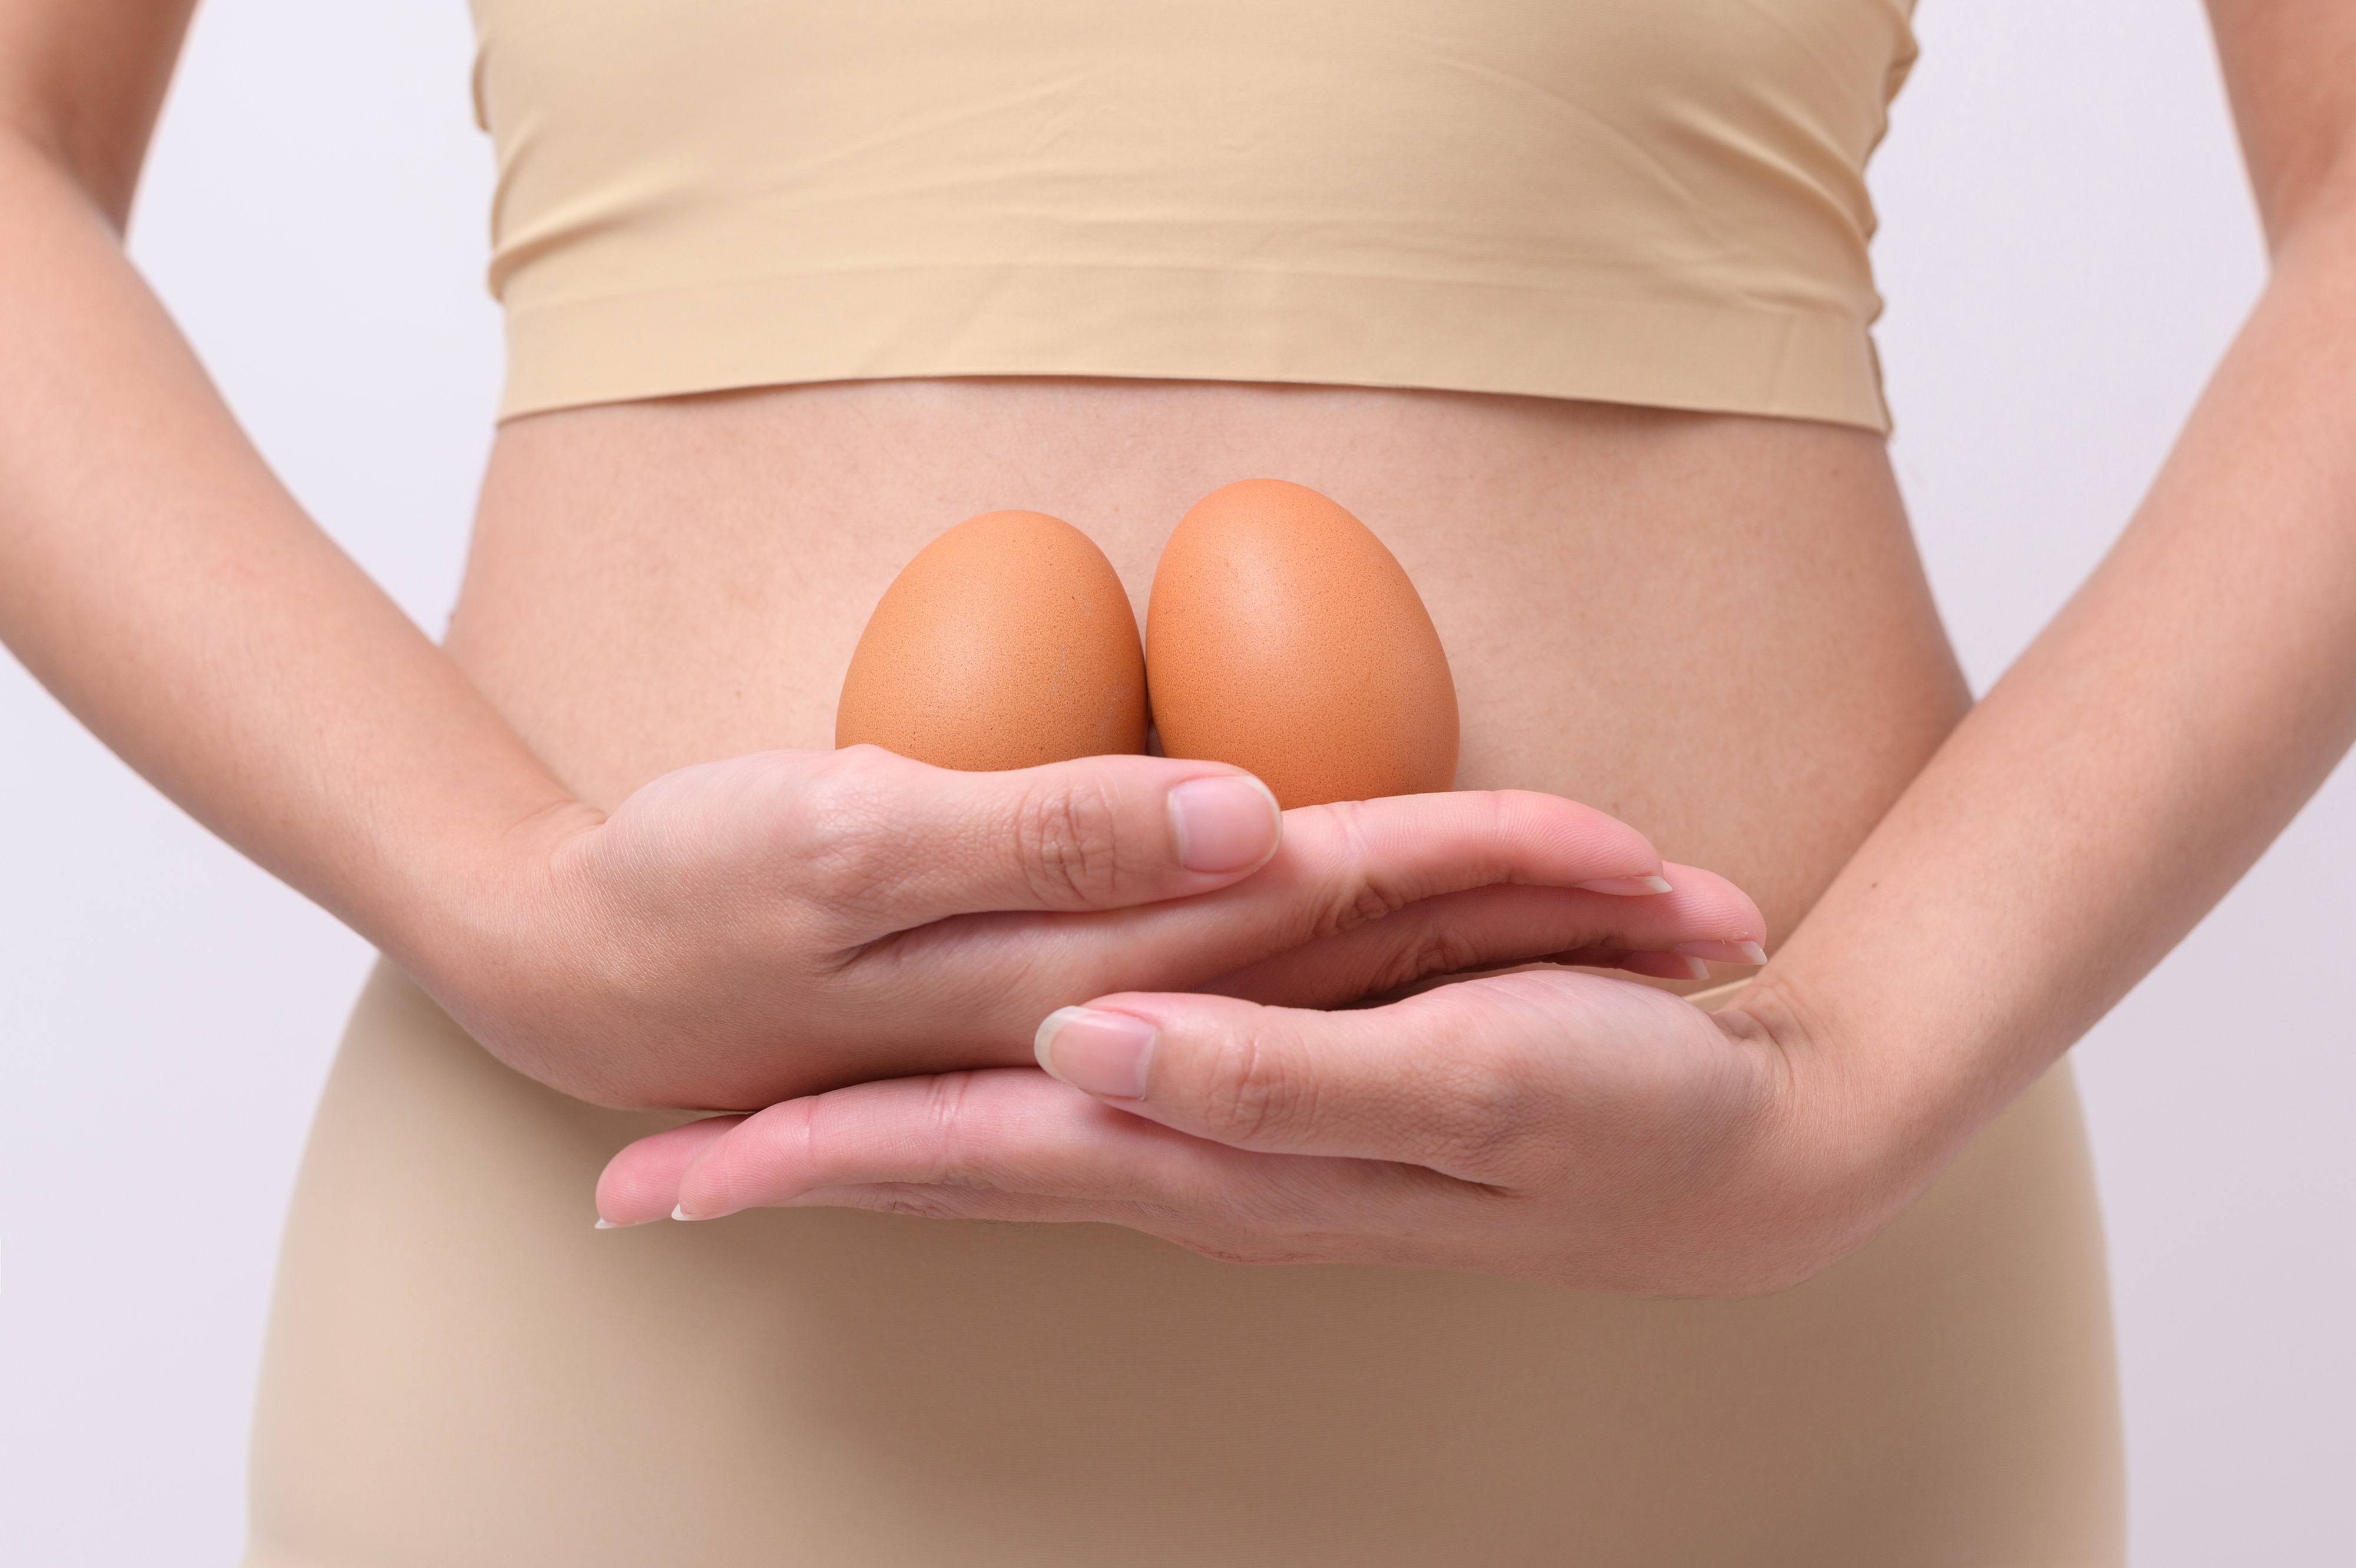 Egg Donor